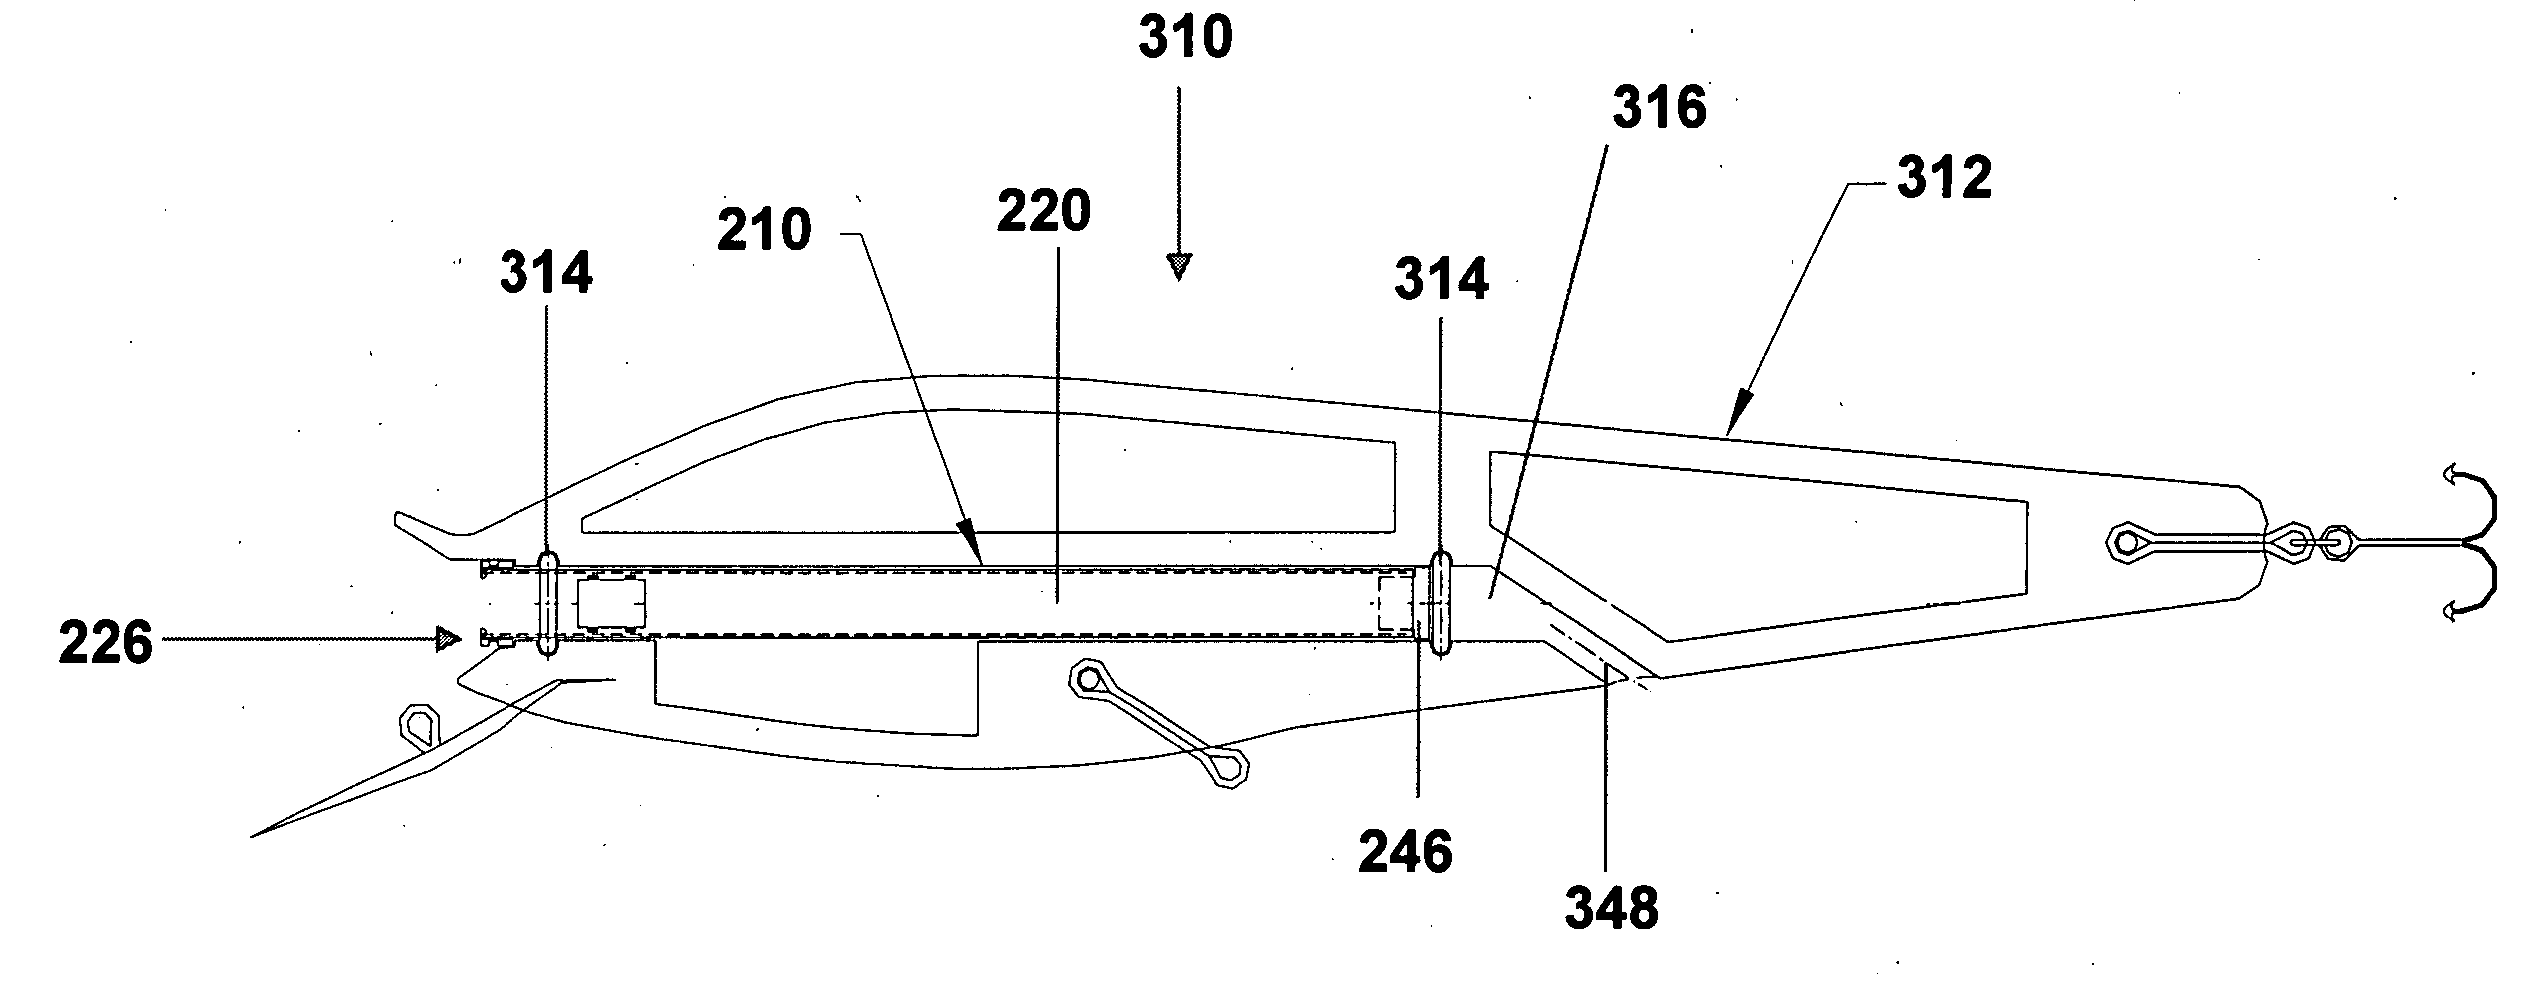 Scent dispensing system for fishing lure